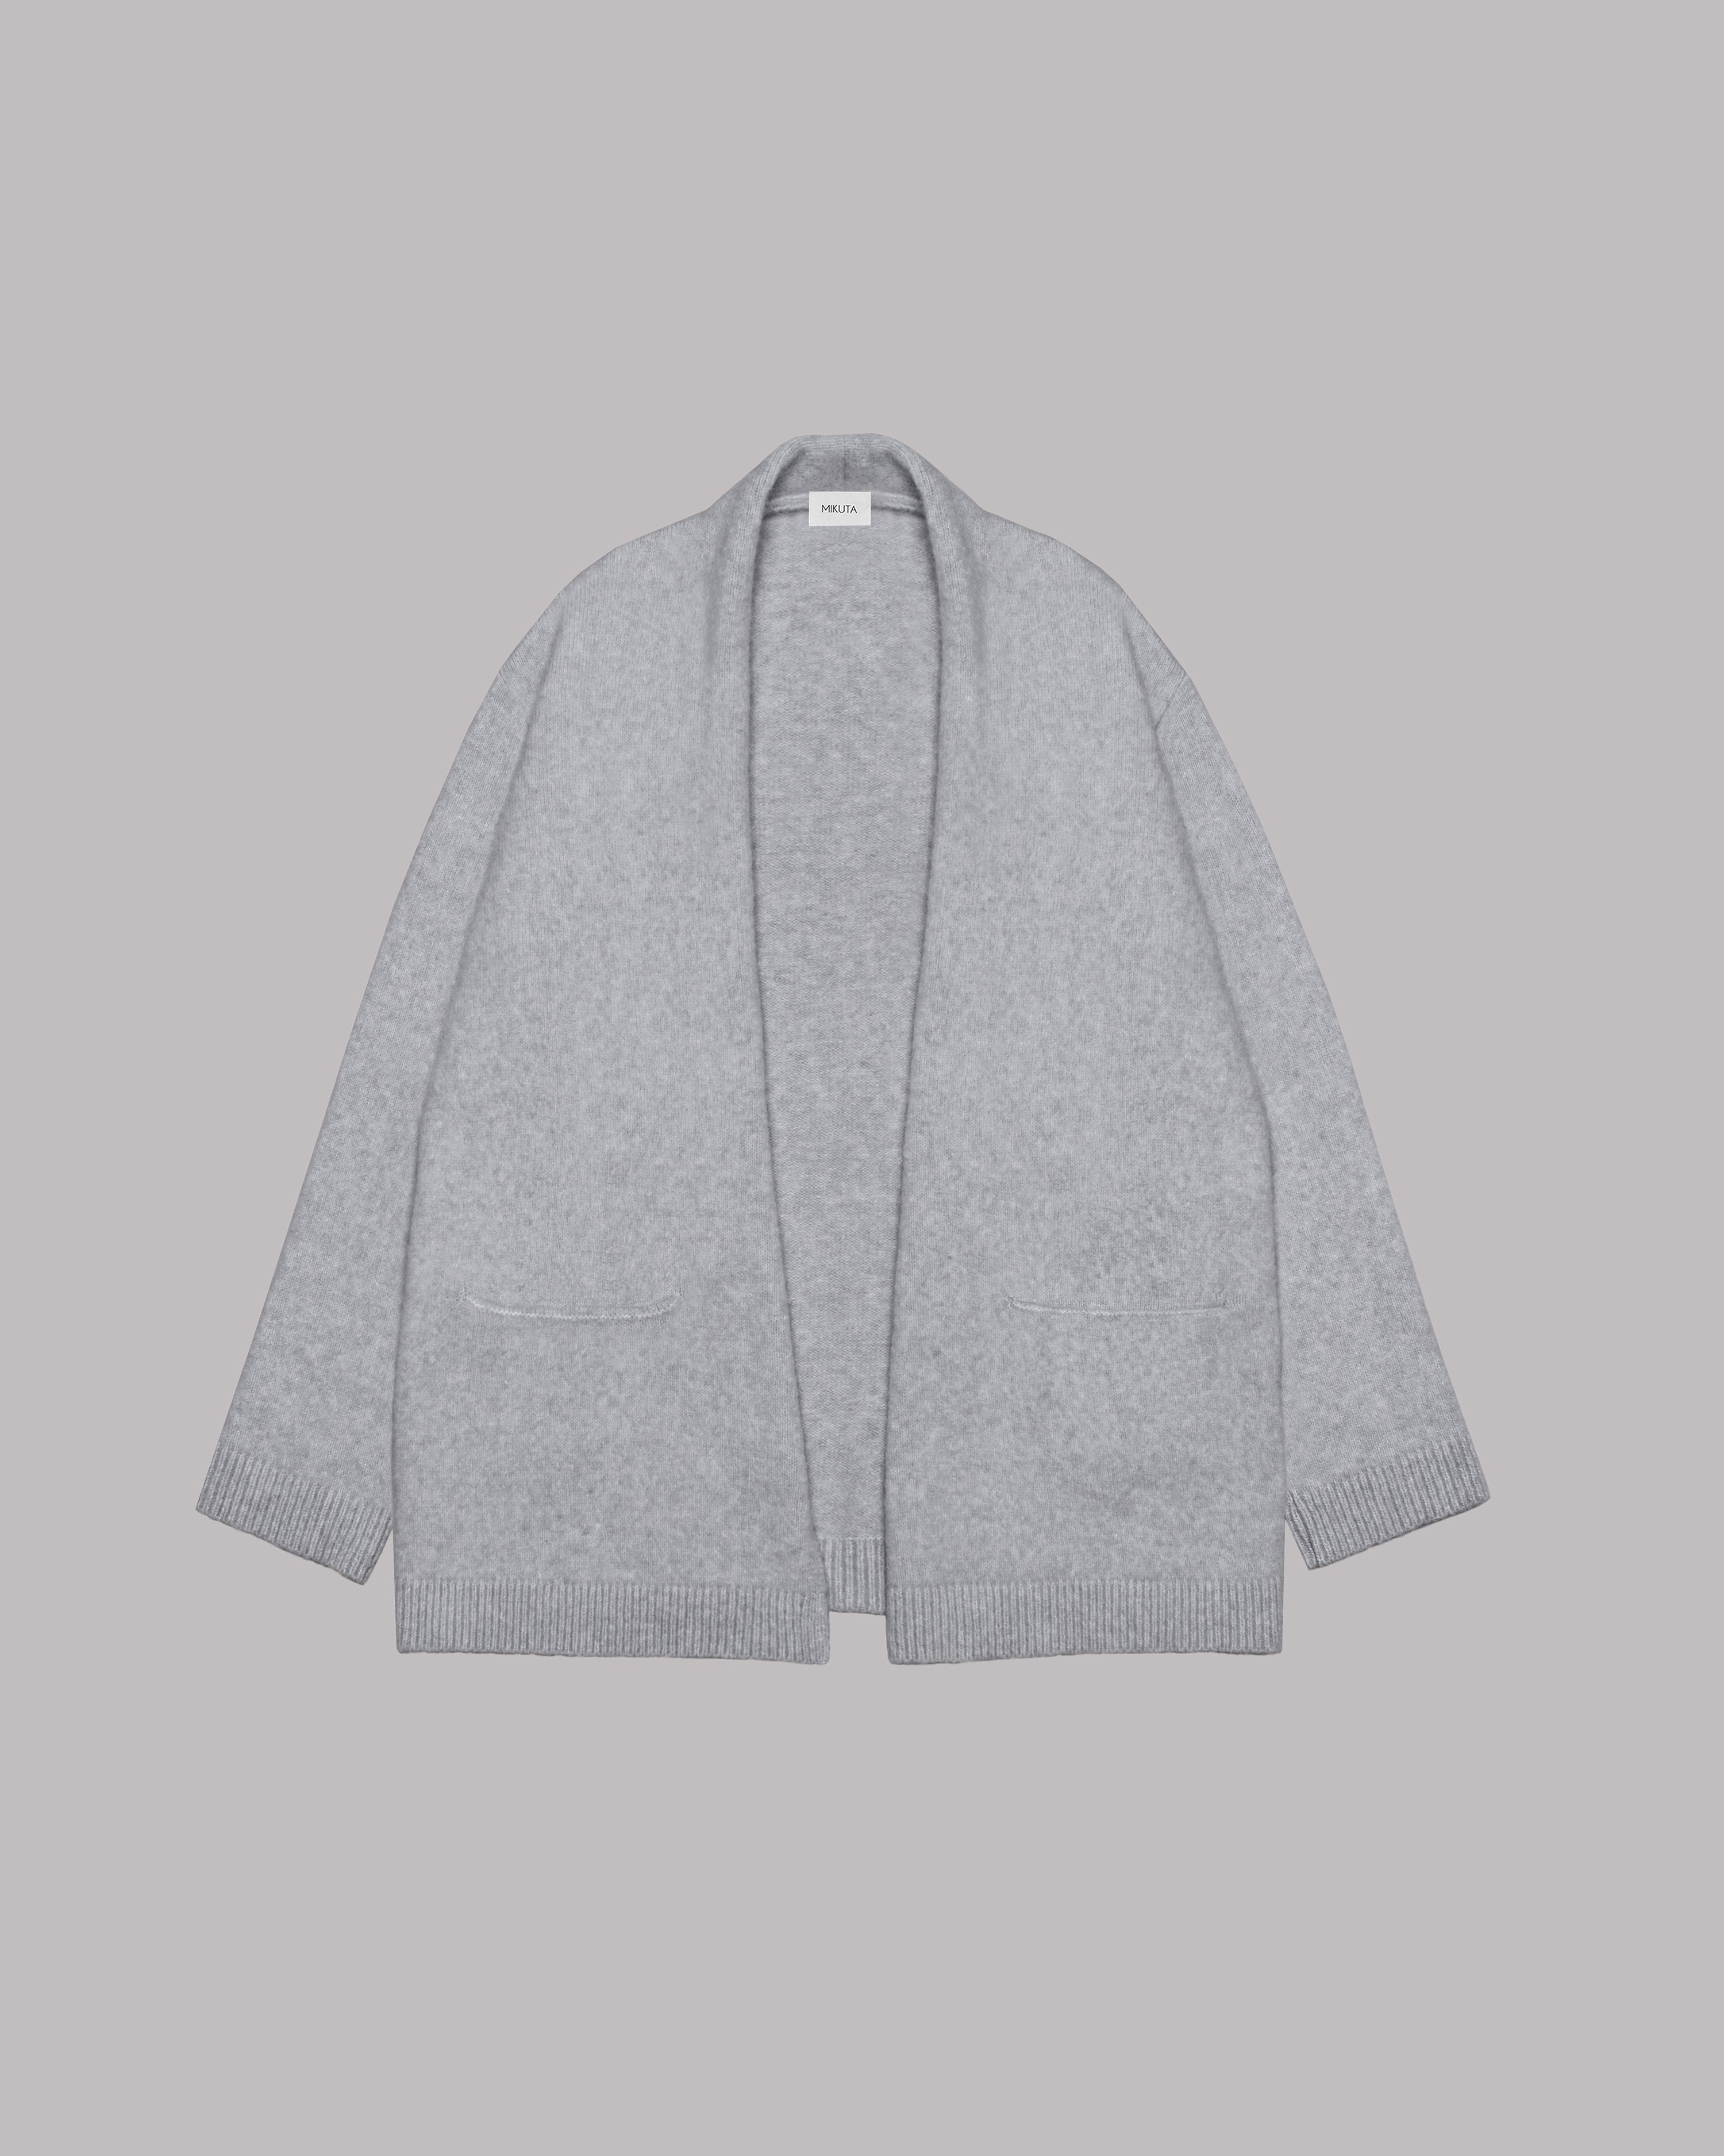 The Grey Oversized Knitted Cardigan